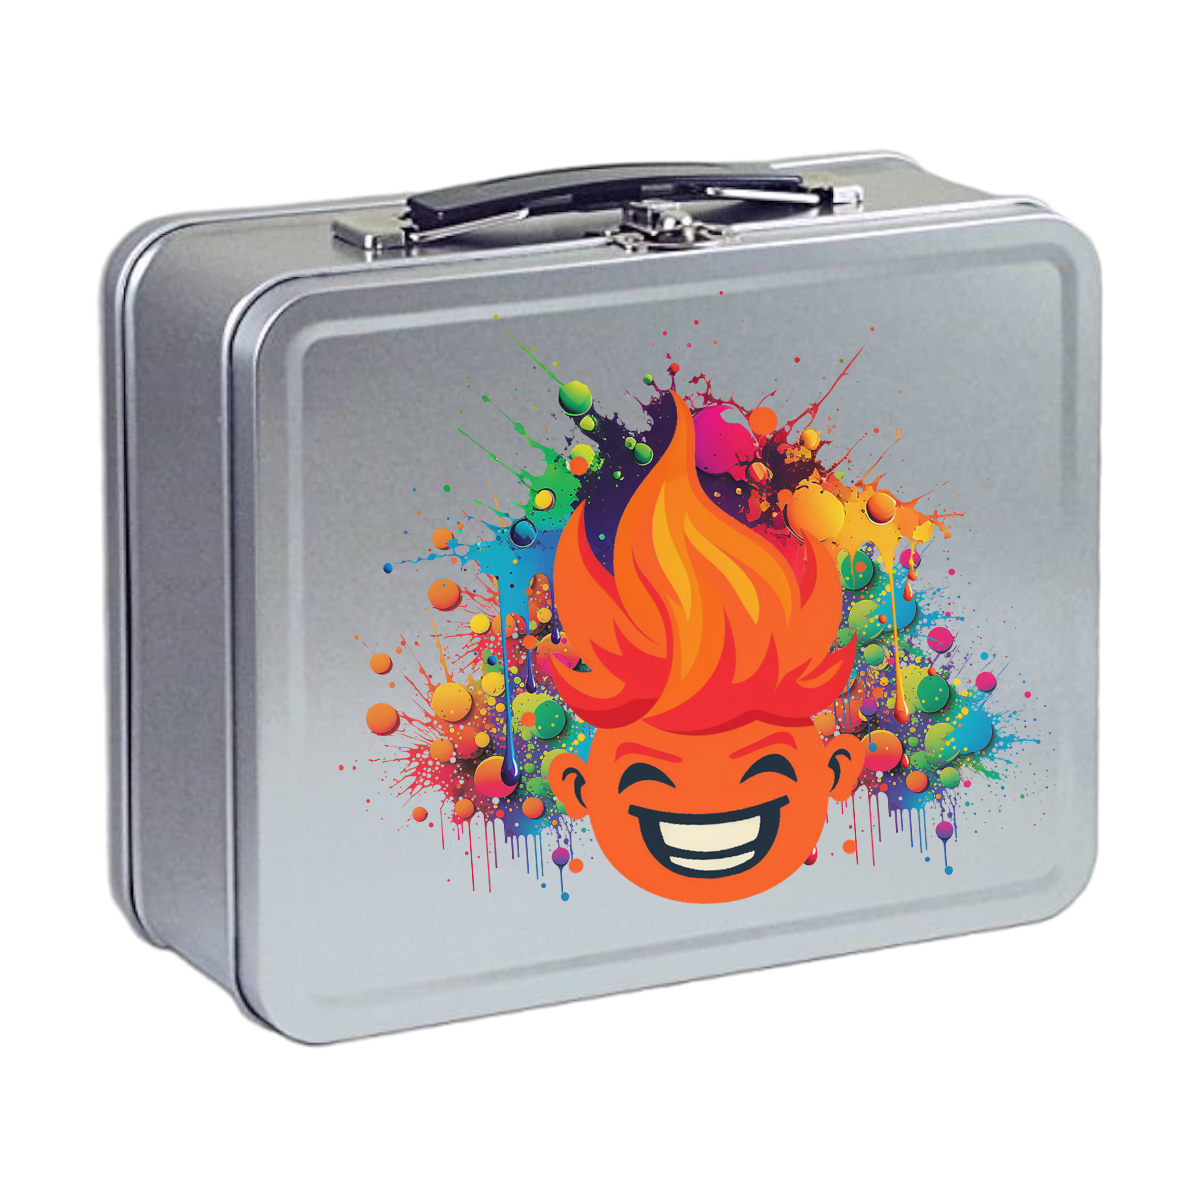 Custom stickers on a lunch box